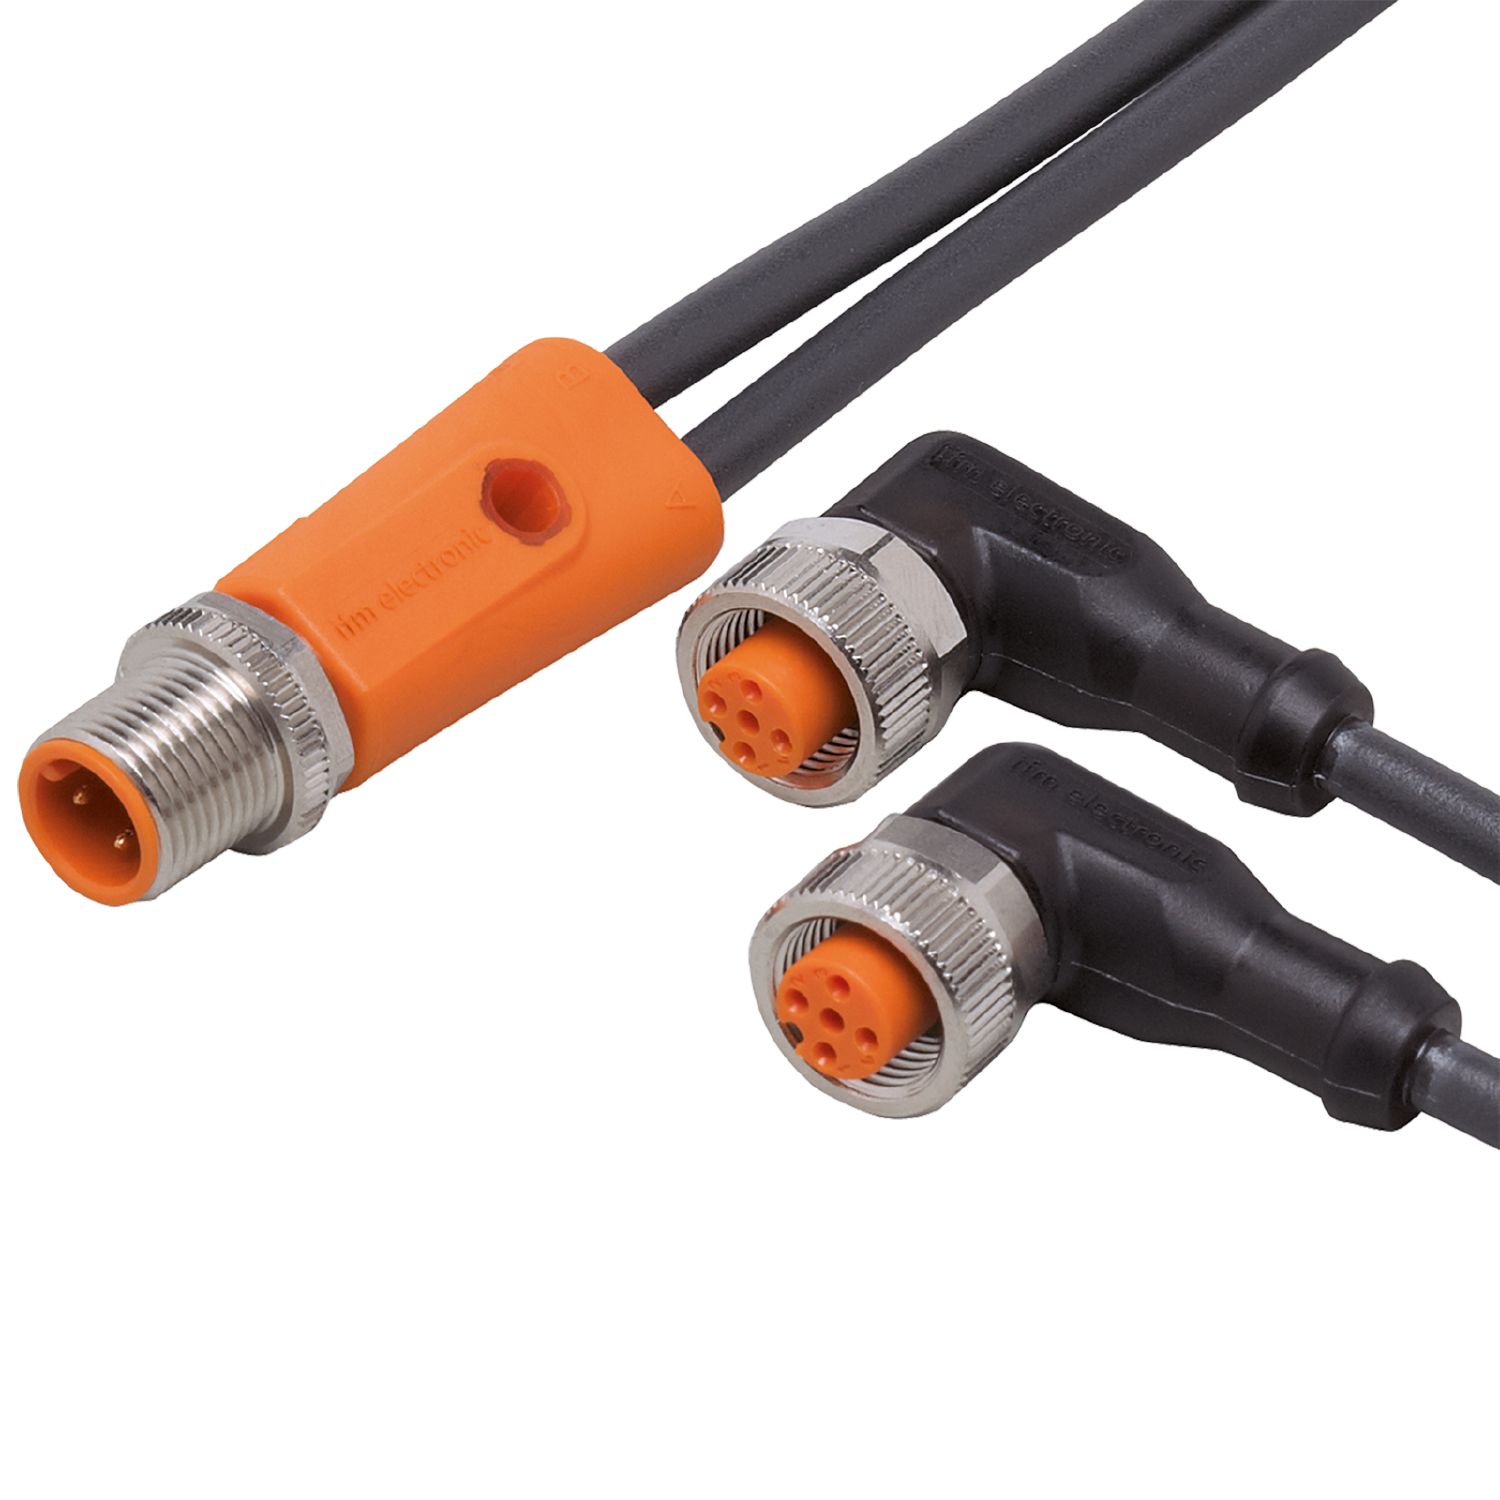 EVC508 - Y connection cable - ifm